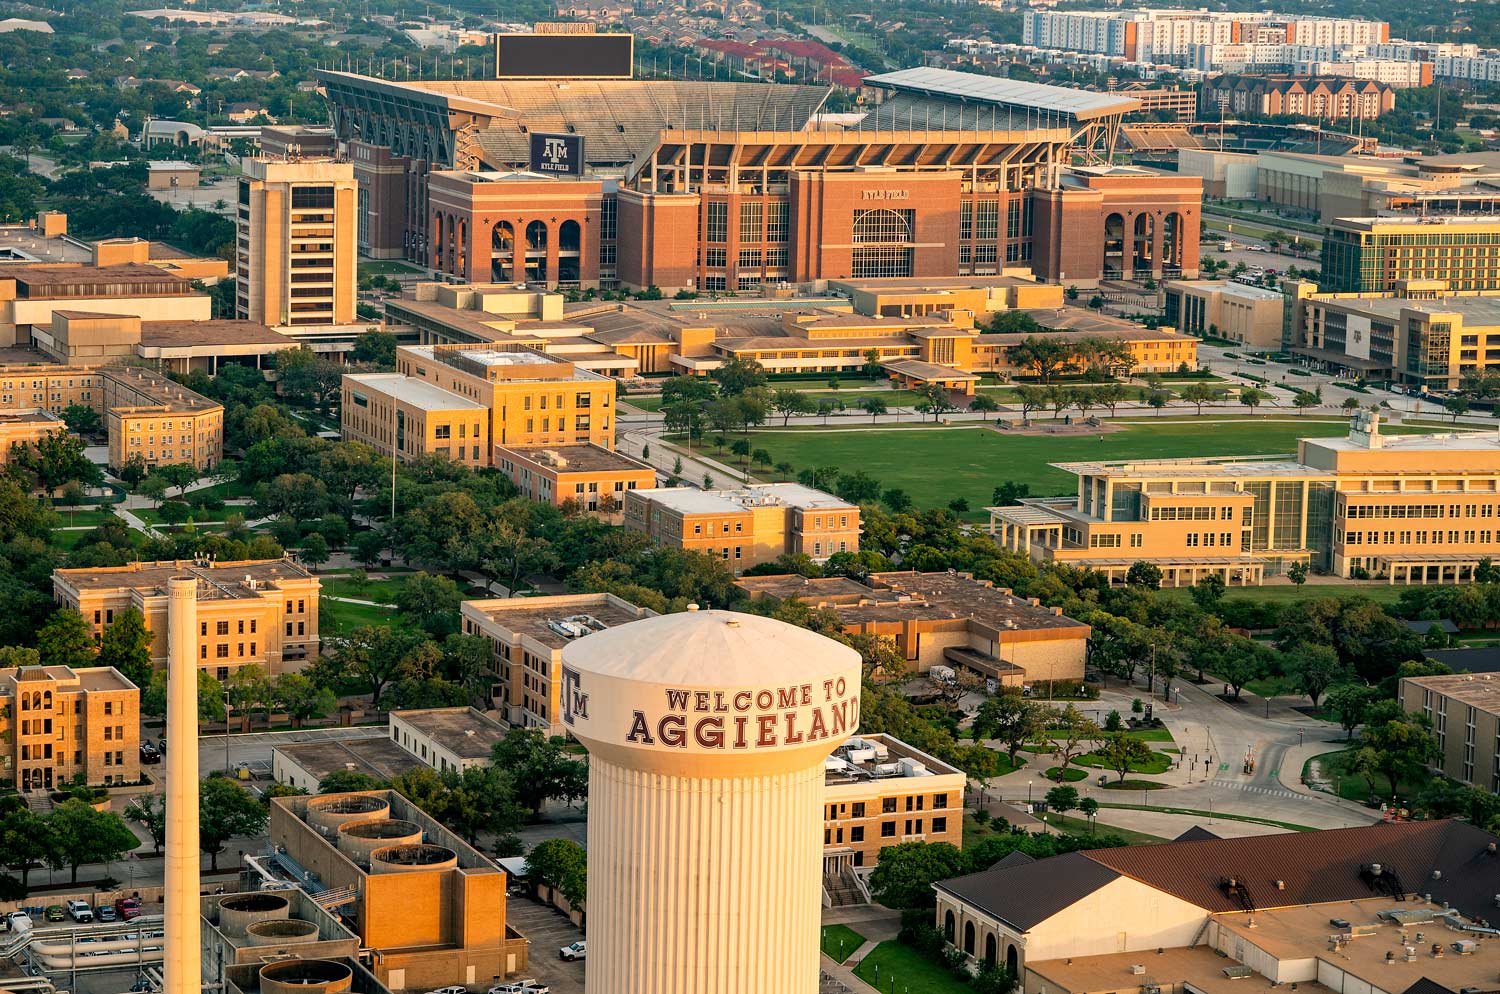 Aerial view of the Texas A&M University - College Station campus